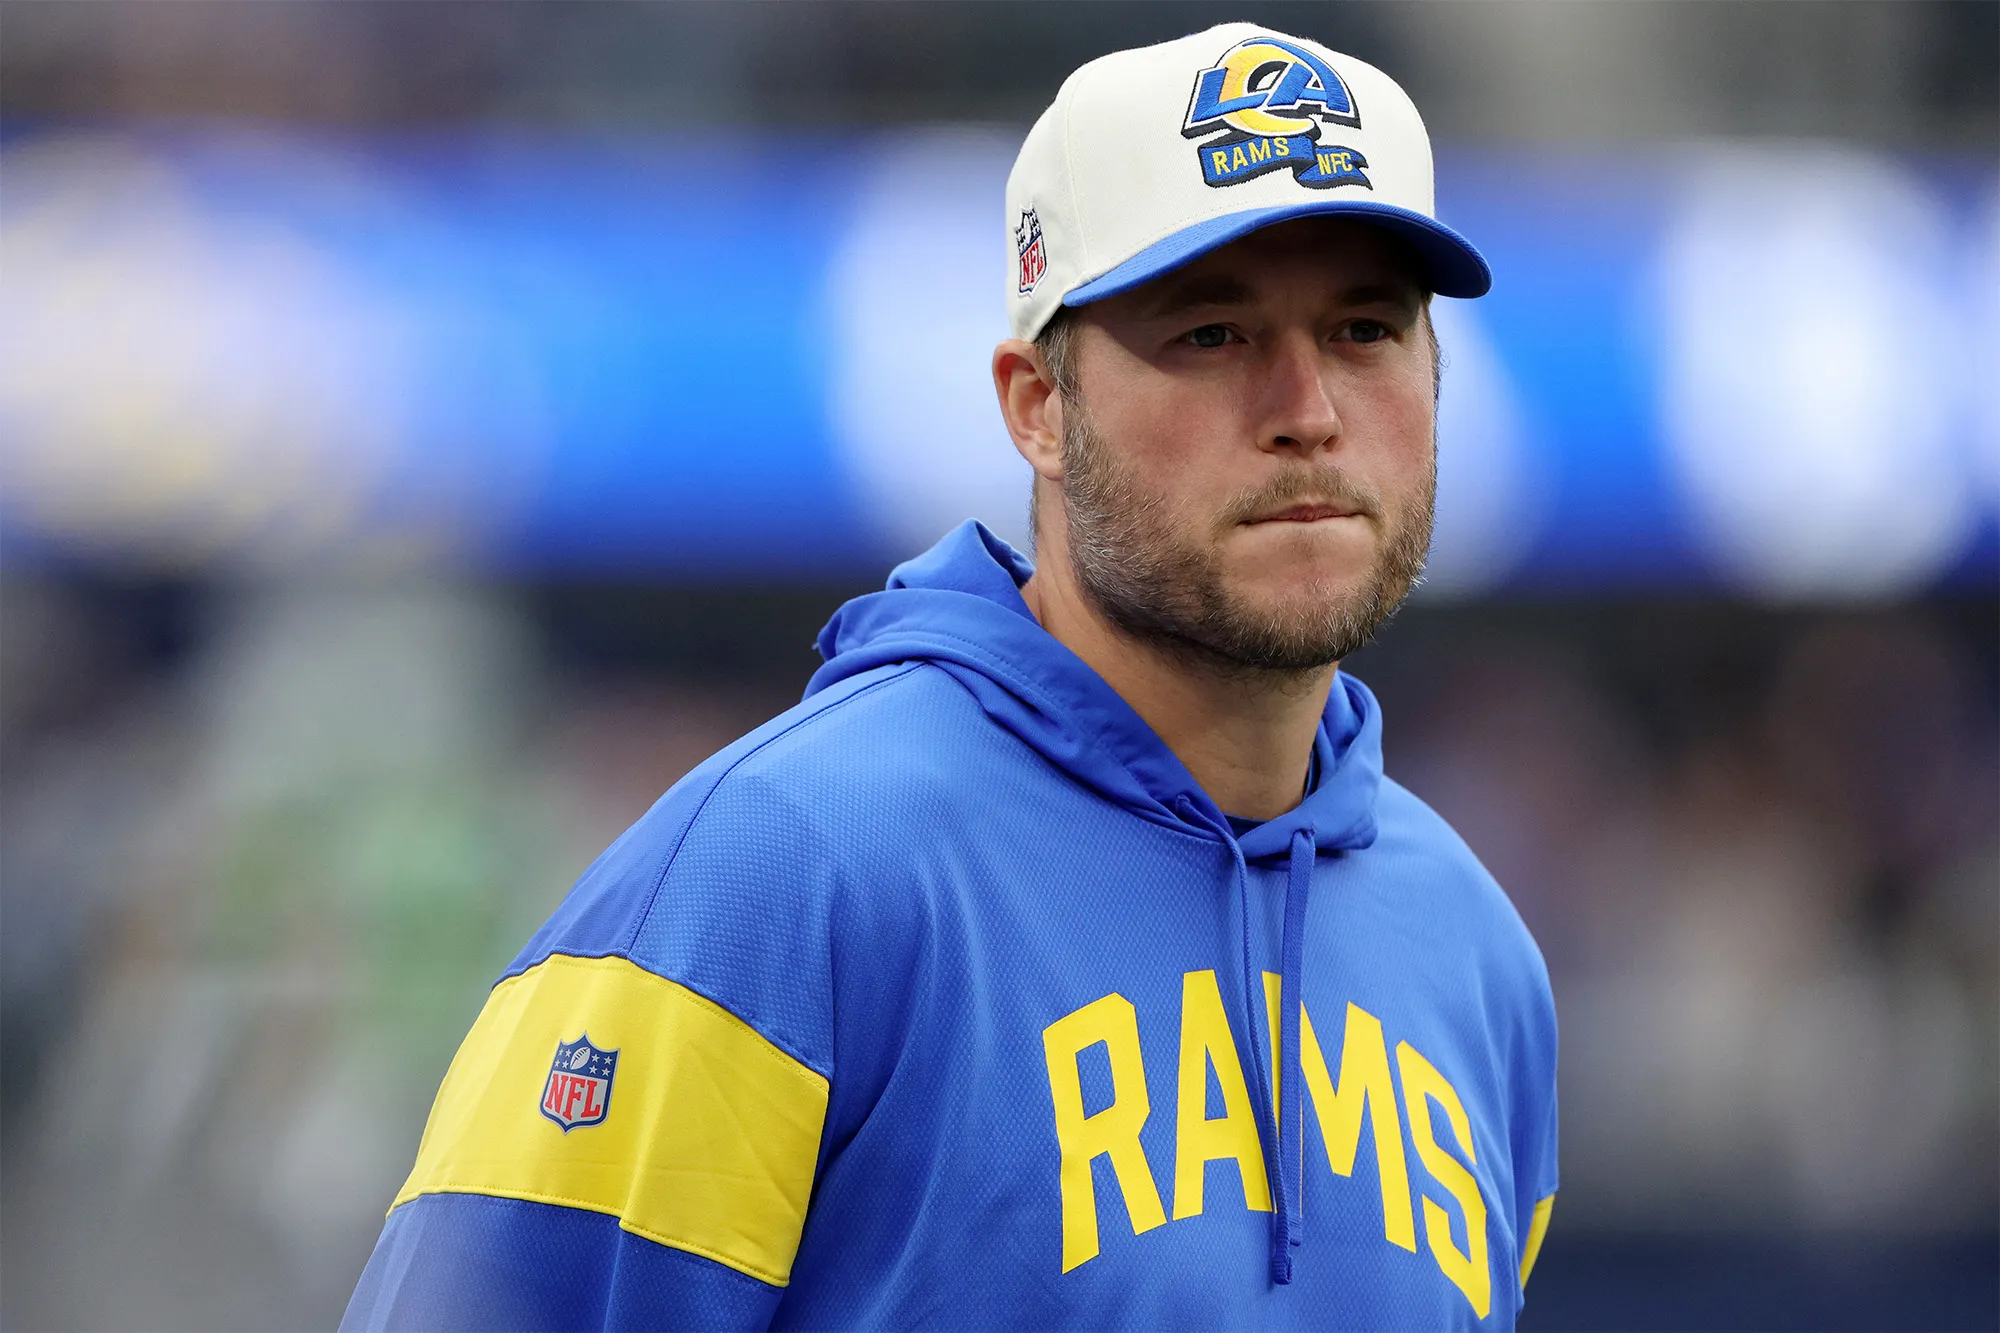 Will Matthew Stafford Stay With the Rams? Inside His Push for a New Deal Beyond 2024